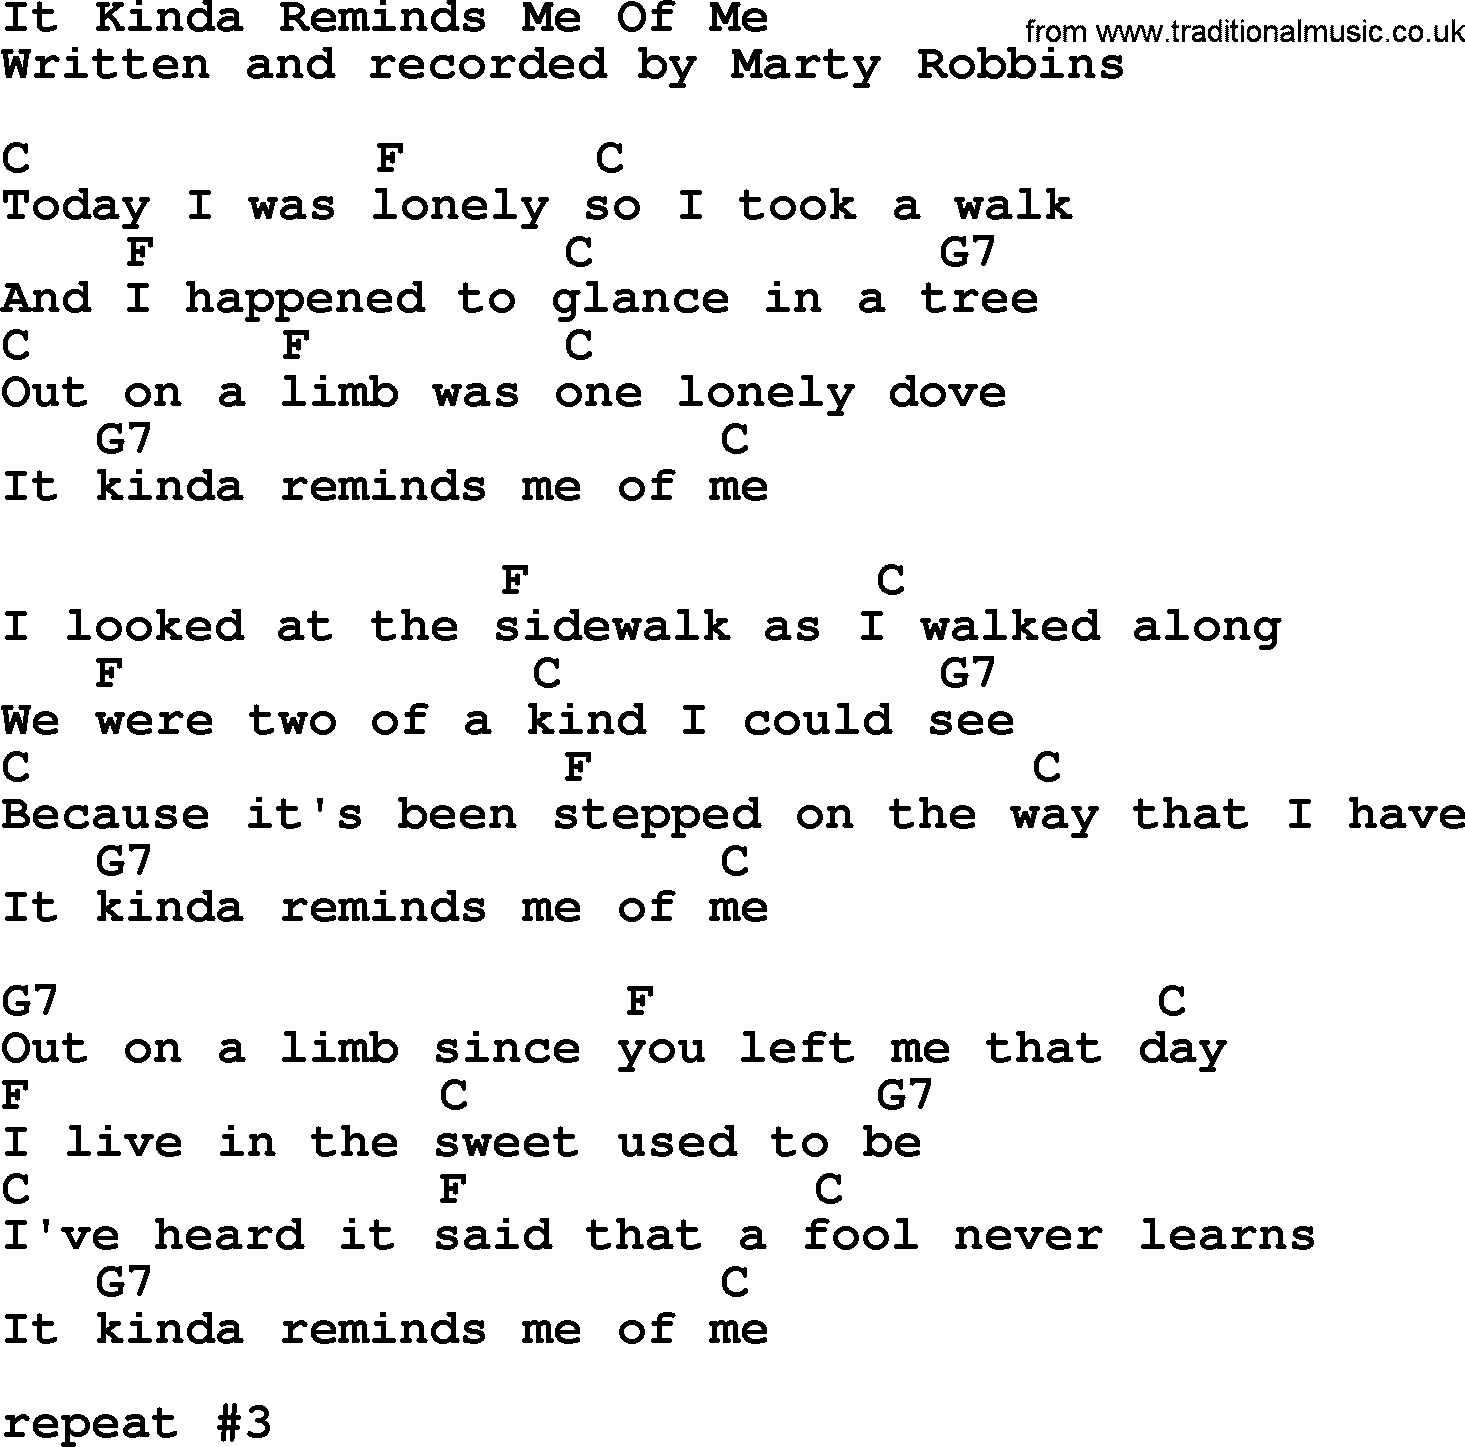 Marty Robbins song: It Kinda Reminds Me Of Me, lyrics and chords